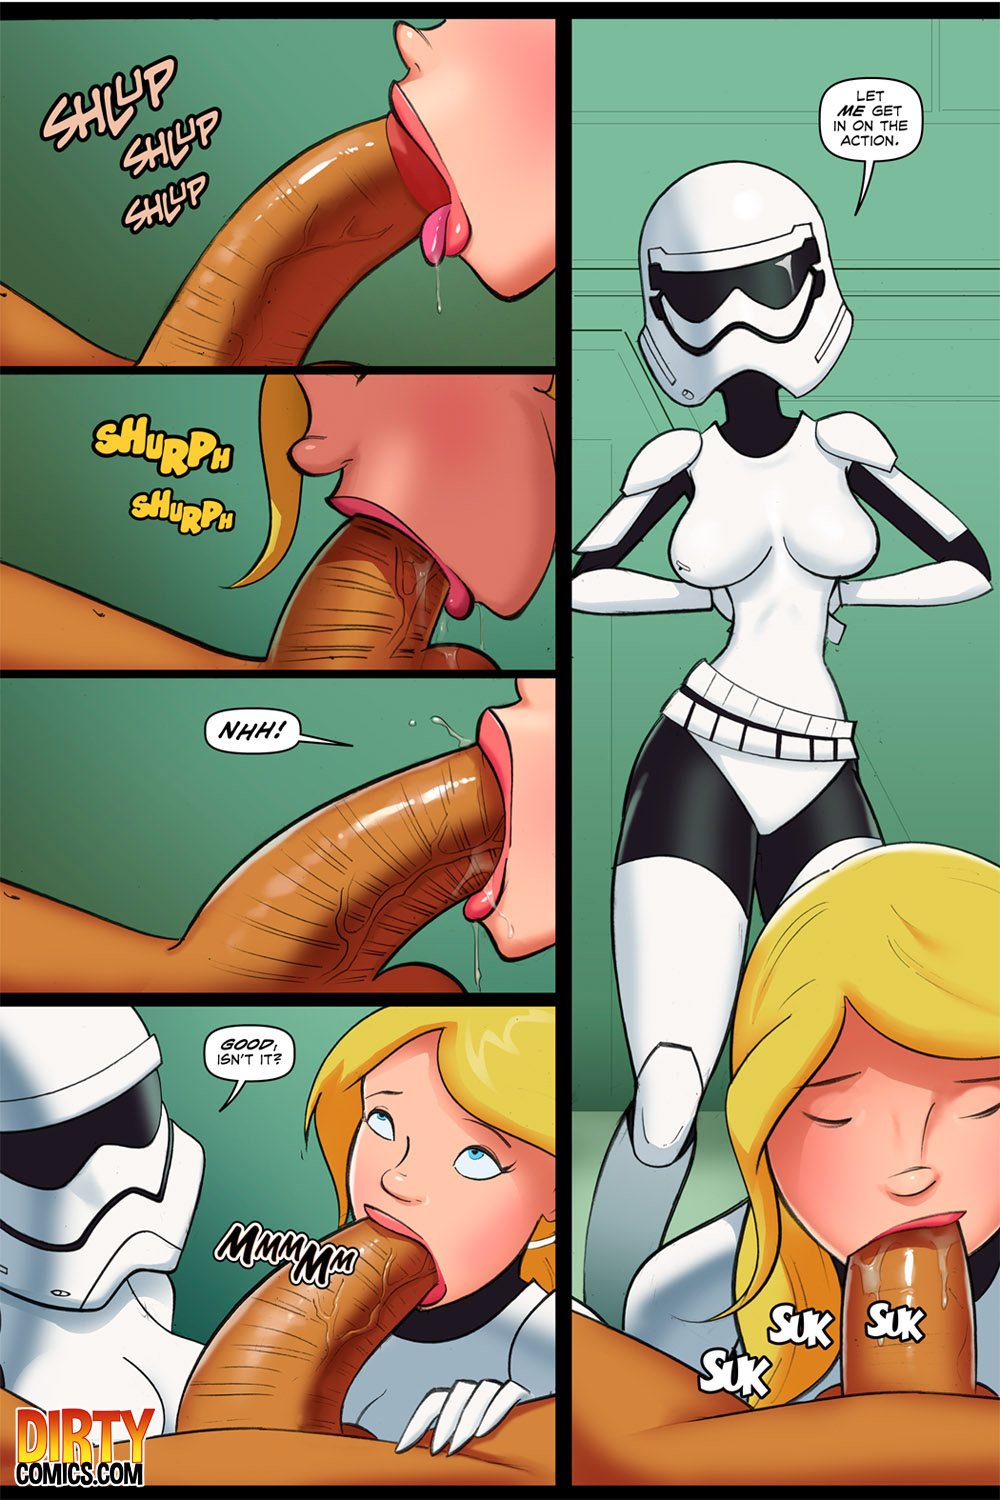 Star Wars Porn - Star Porn - The Cock Awakens Star Wars by JKR - Complete - FreeAdultComix